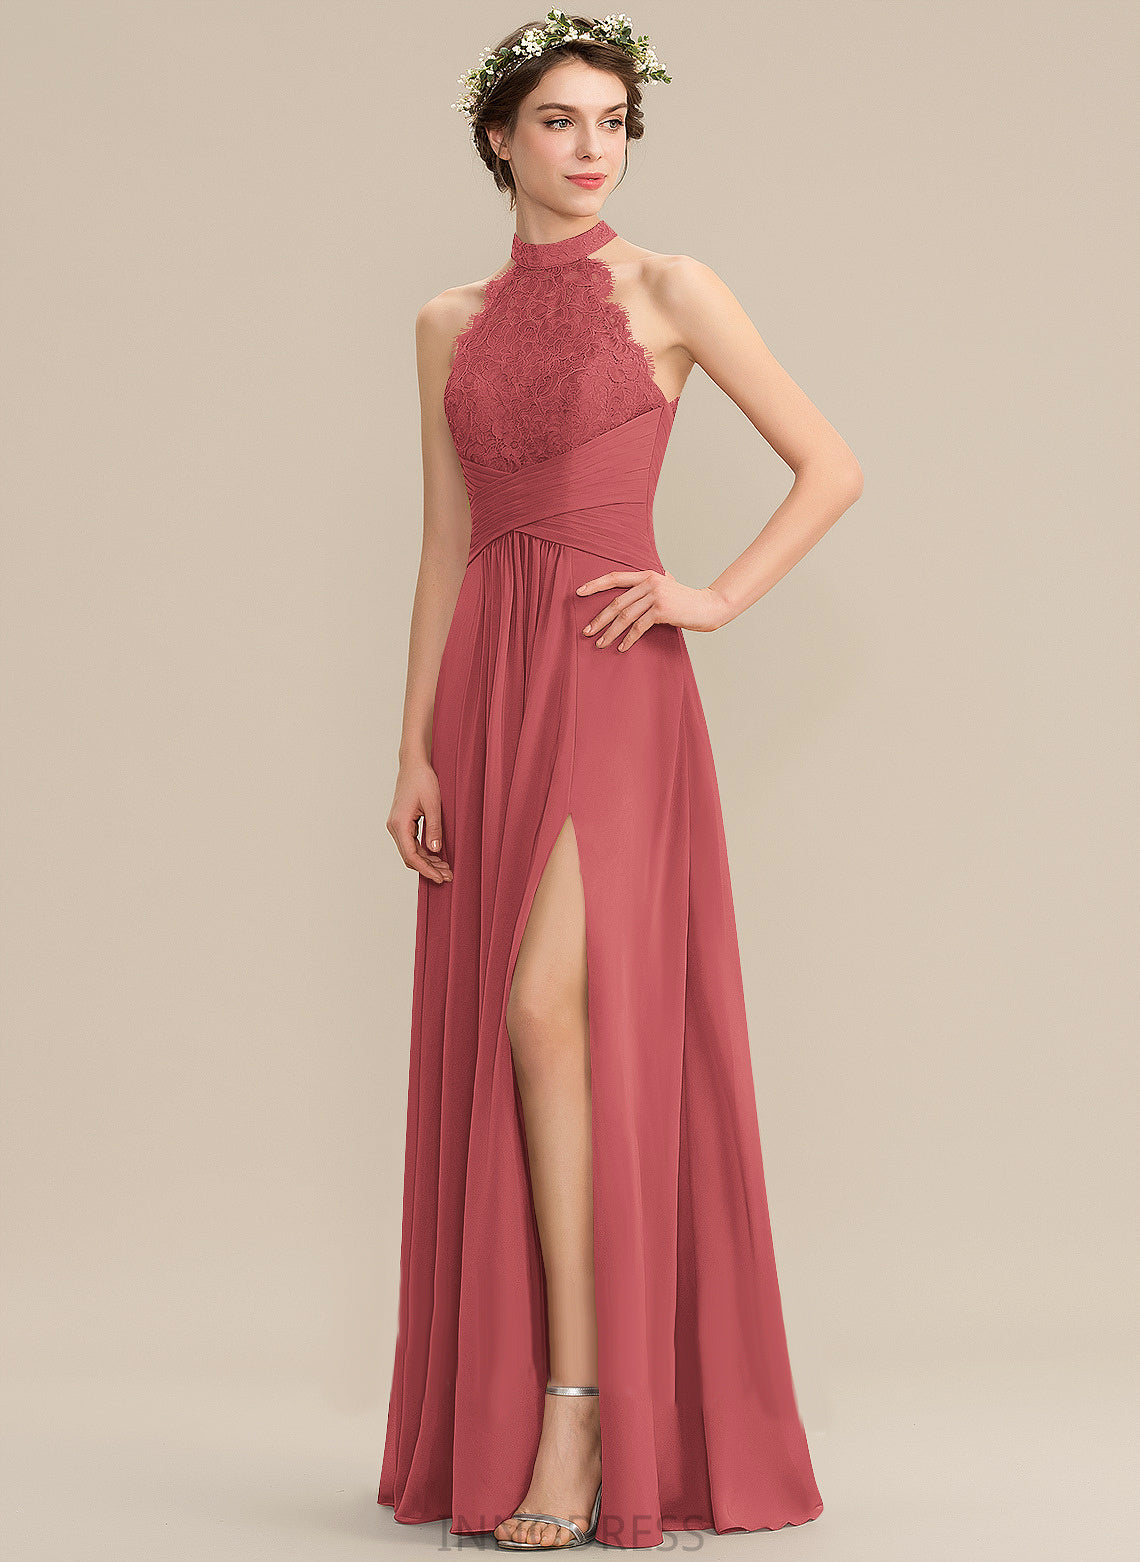 Prom Dresses A-Line Neck Split With Jane Lace High Ruffle Front Chiffon Floor-Length